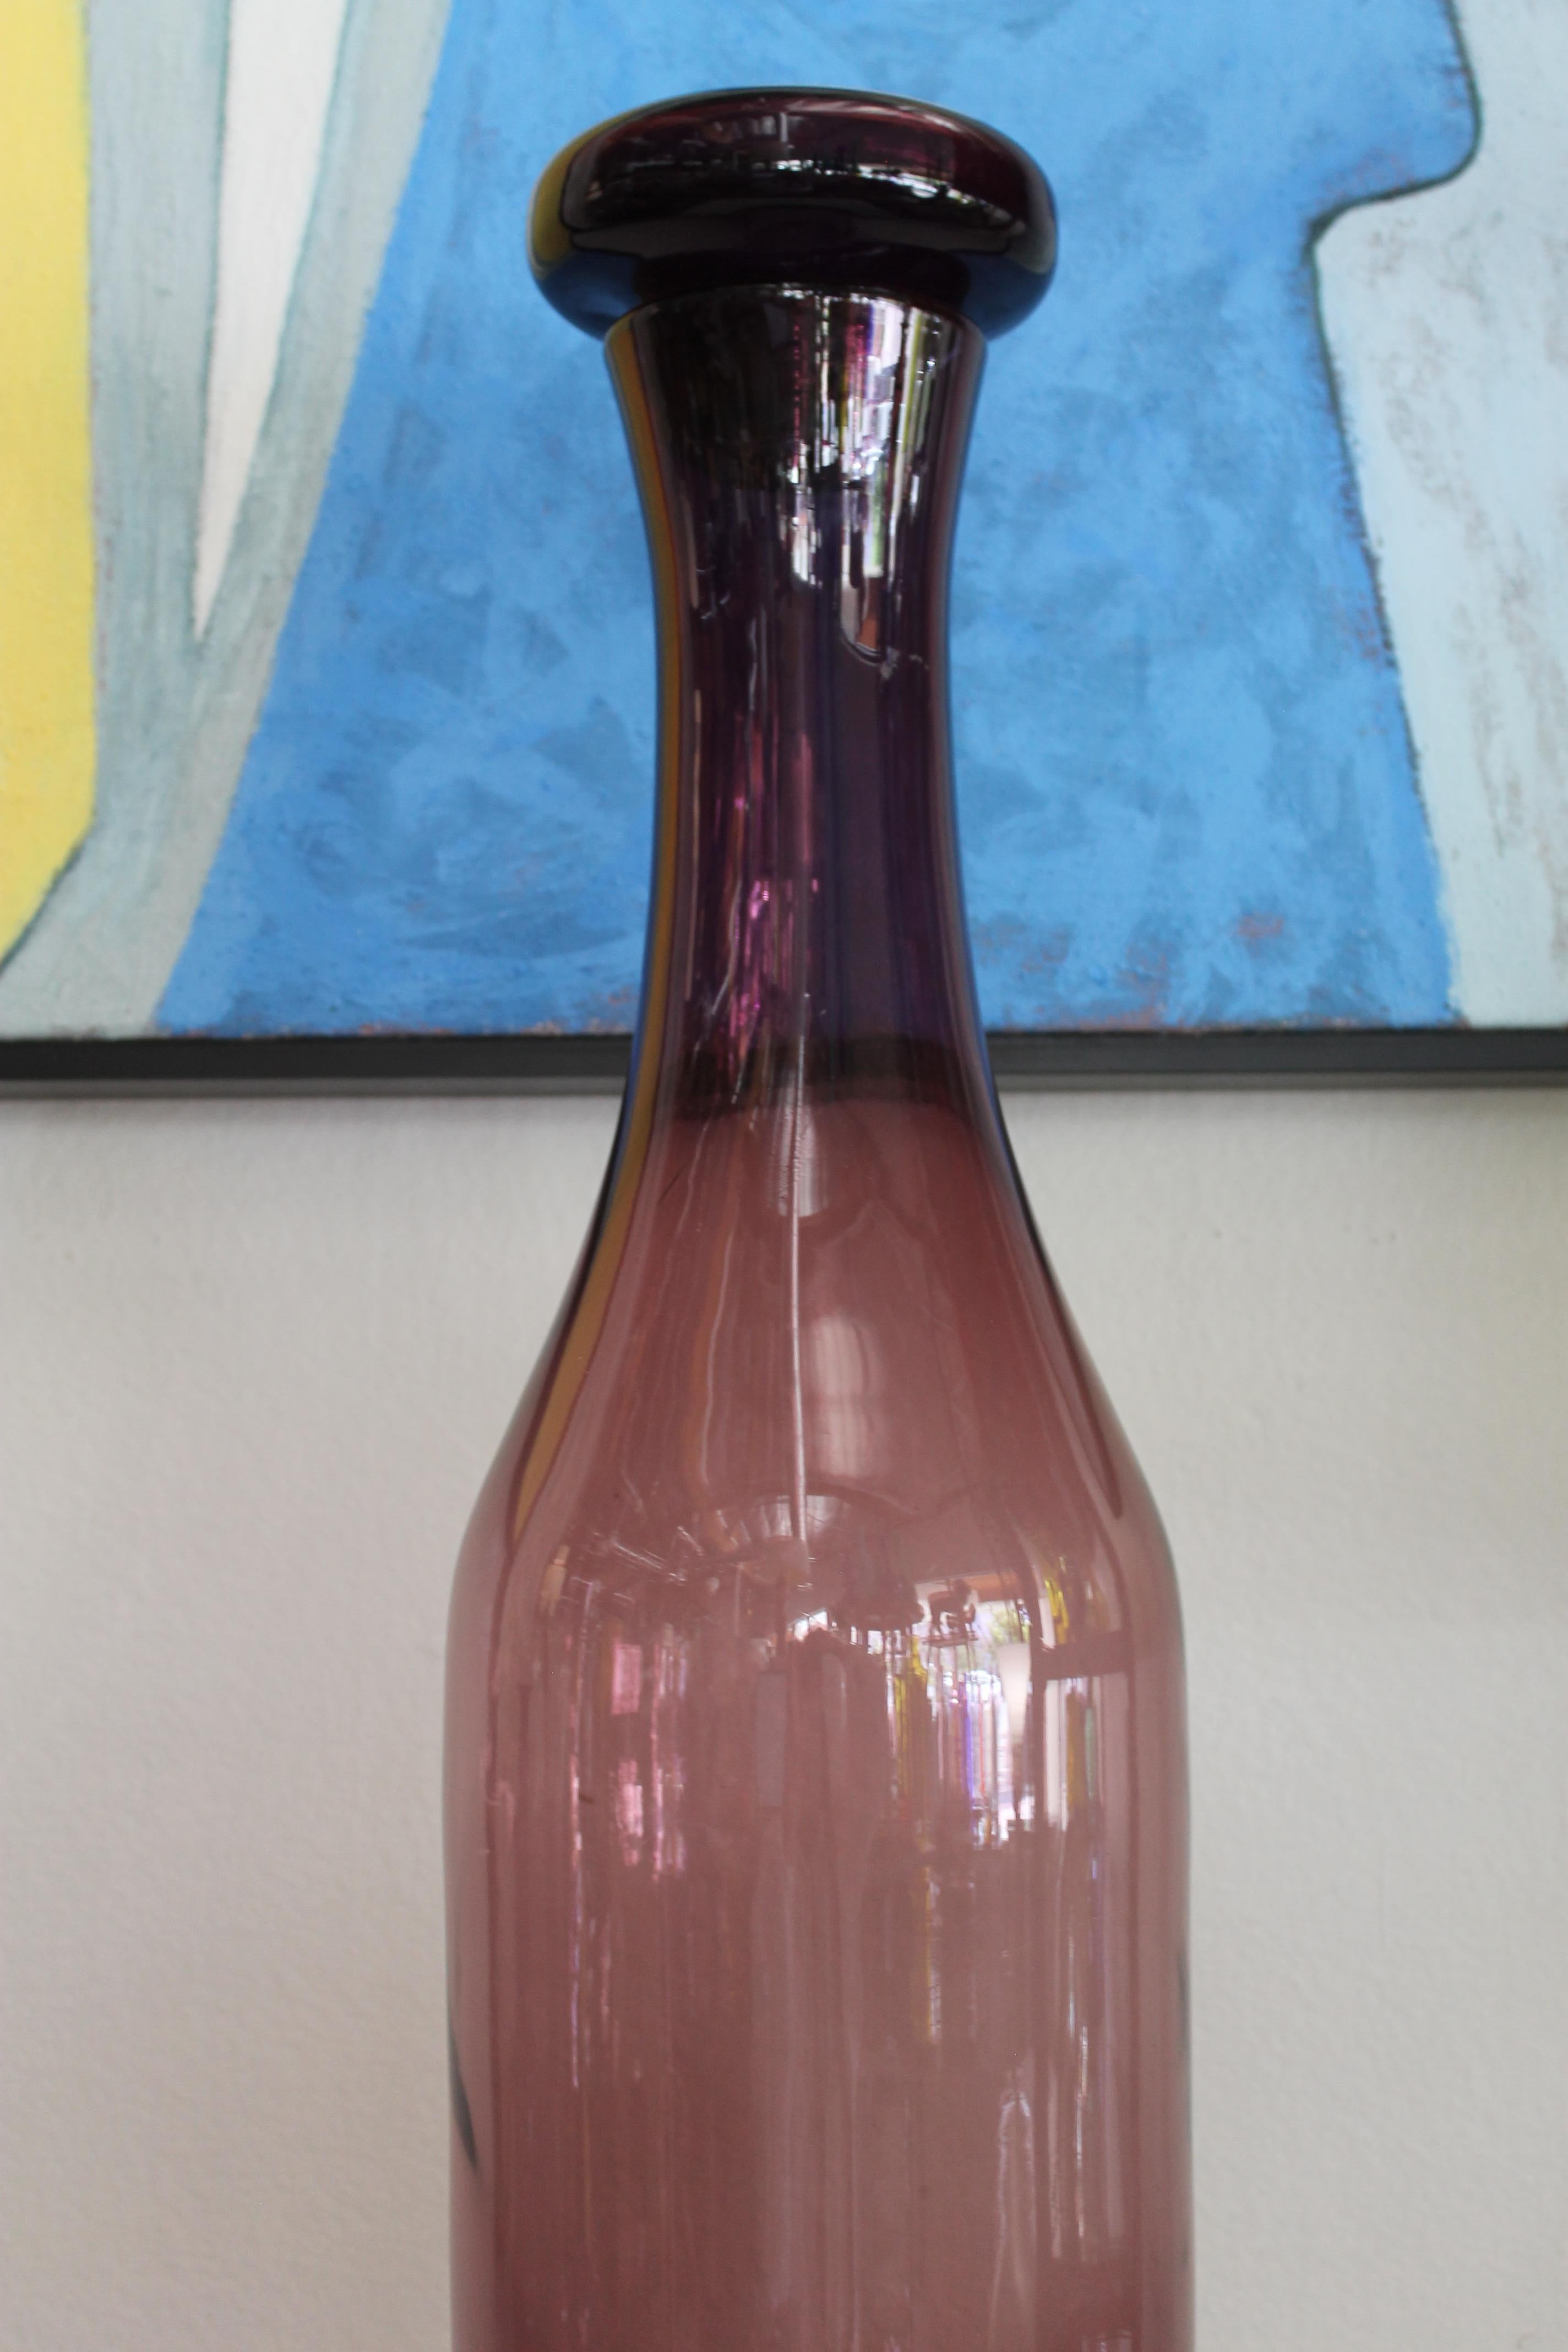 Architectural lilac glass bottle with stopper by Wayne Husted and manufactured by Blenko, USA. Measures 31.5